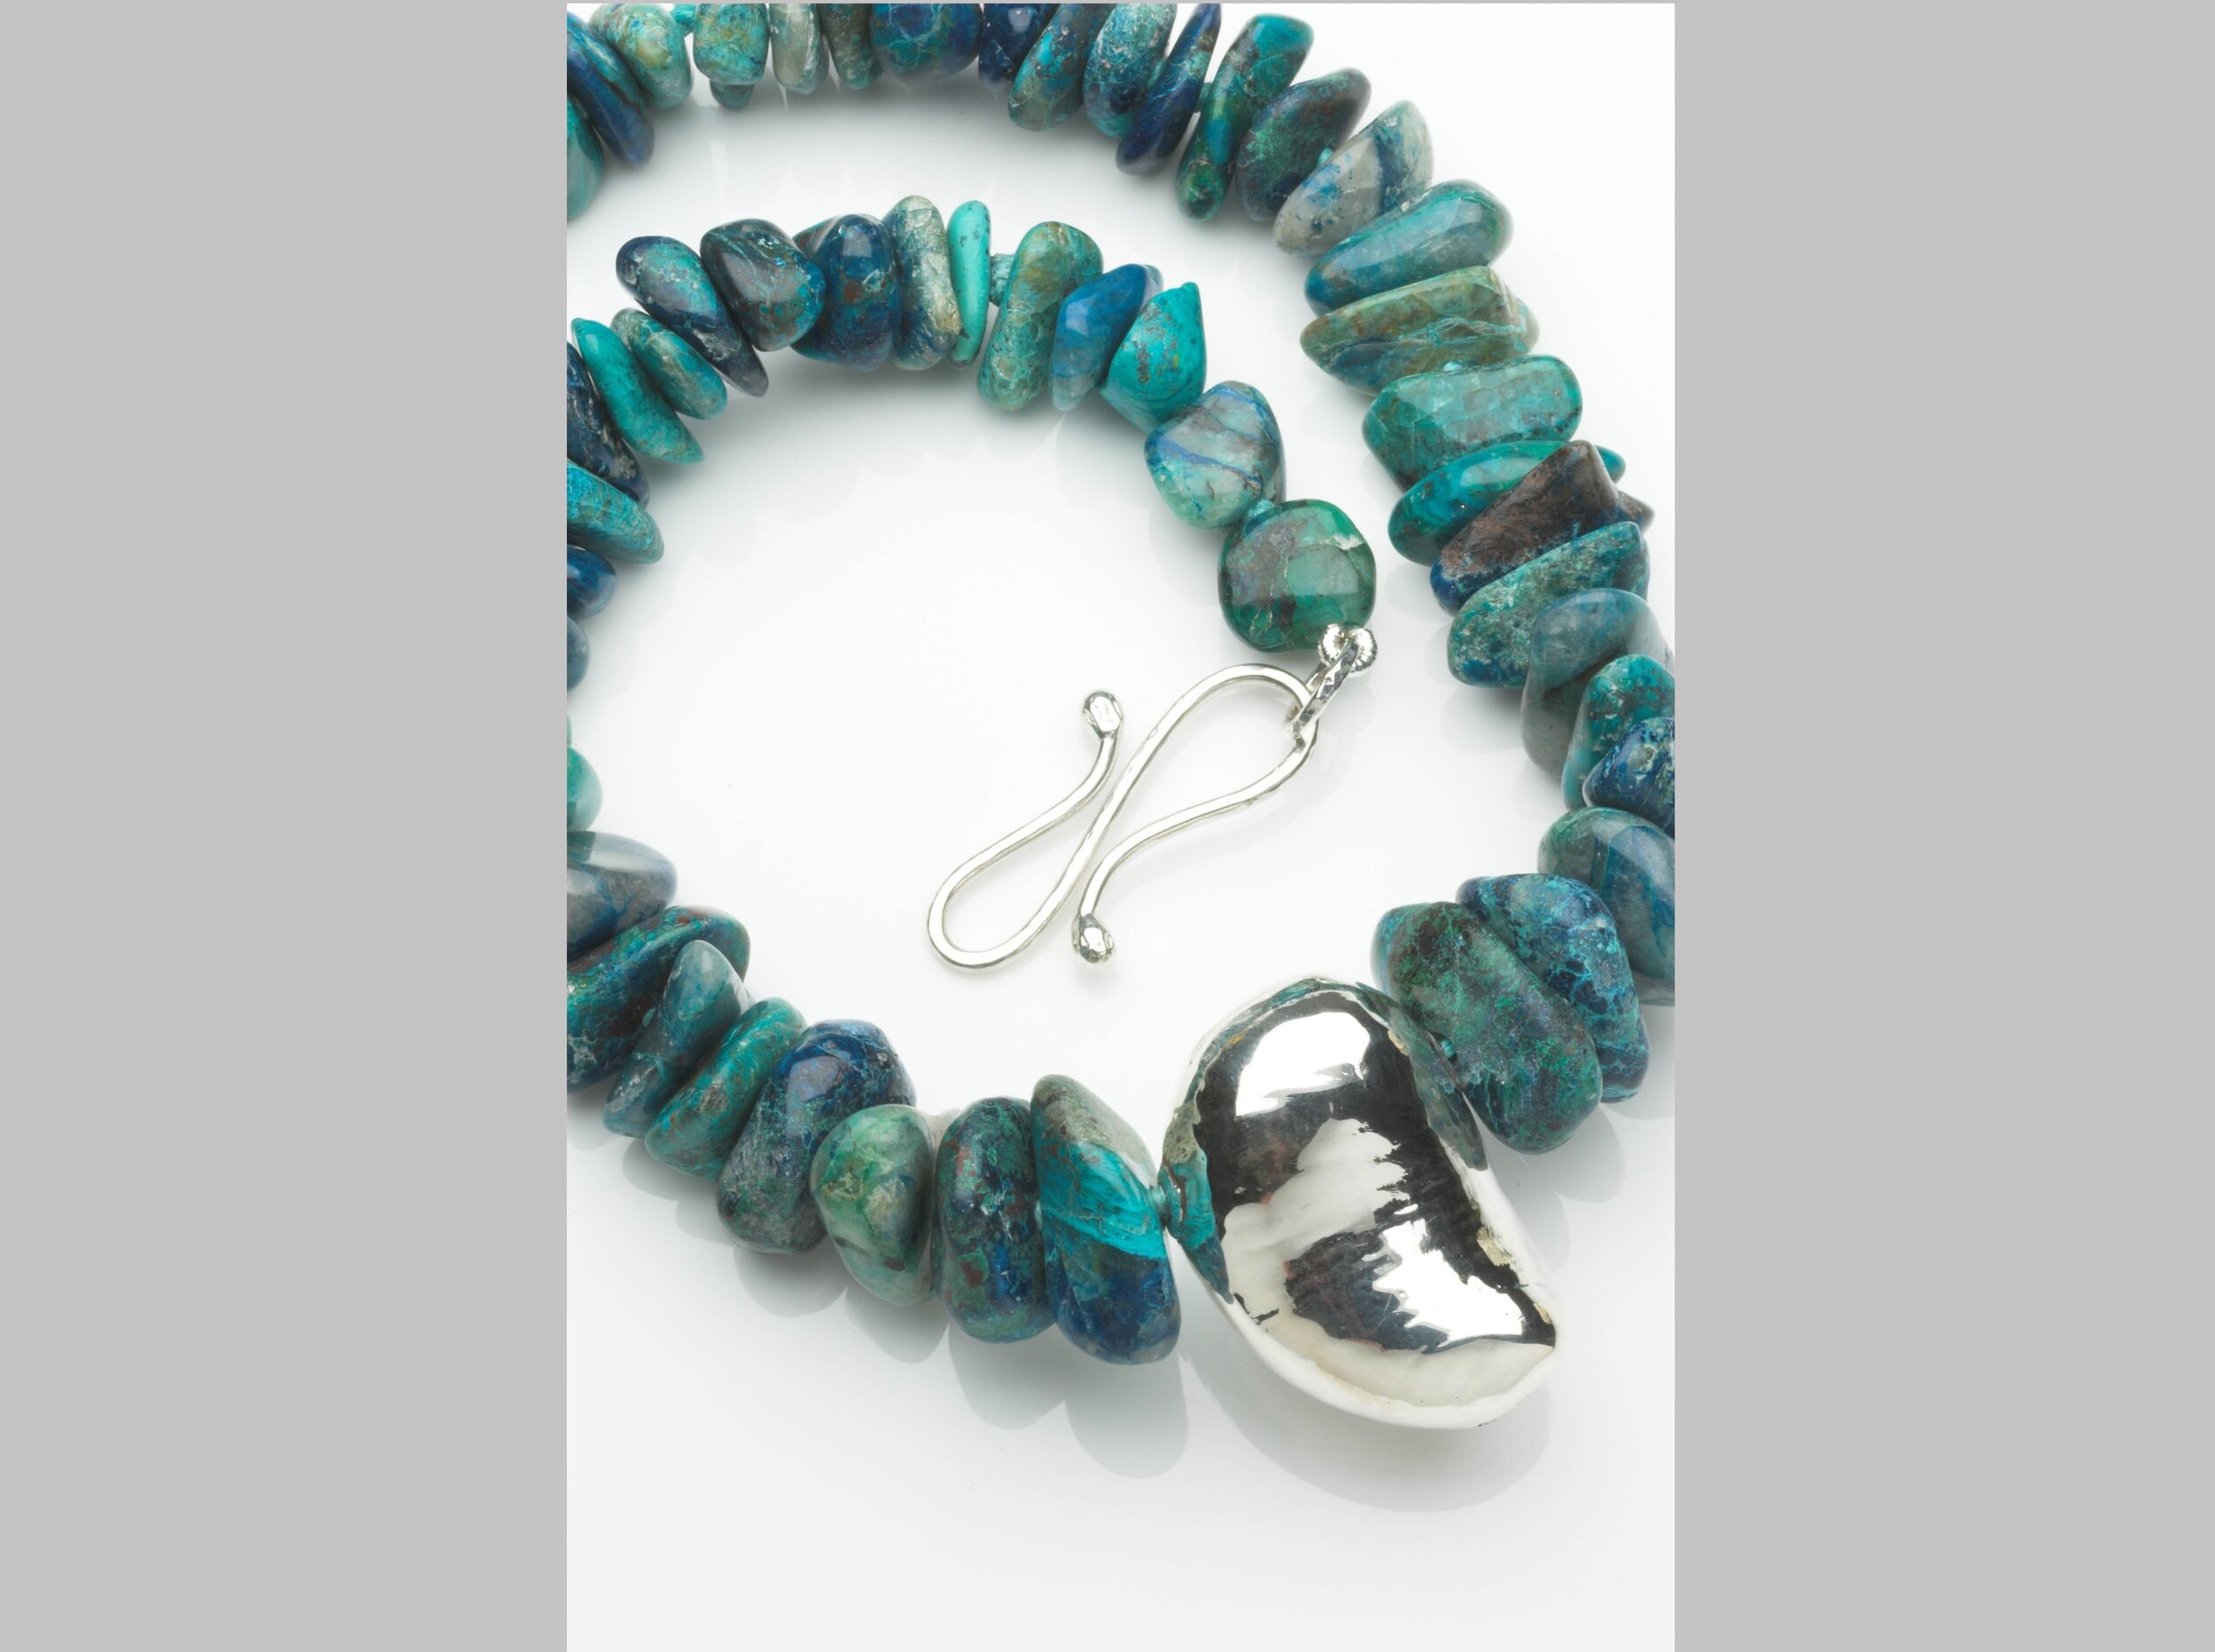 Chrysocolla Necklace with Hallmarked Silver shape £640.jpg